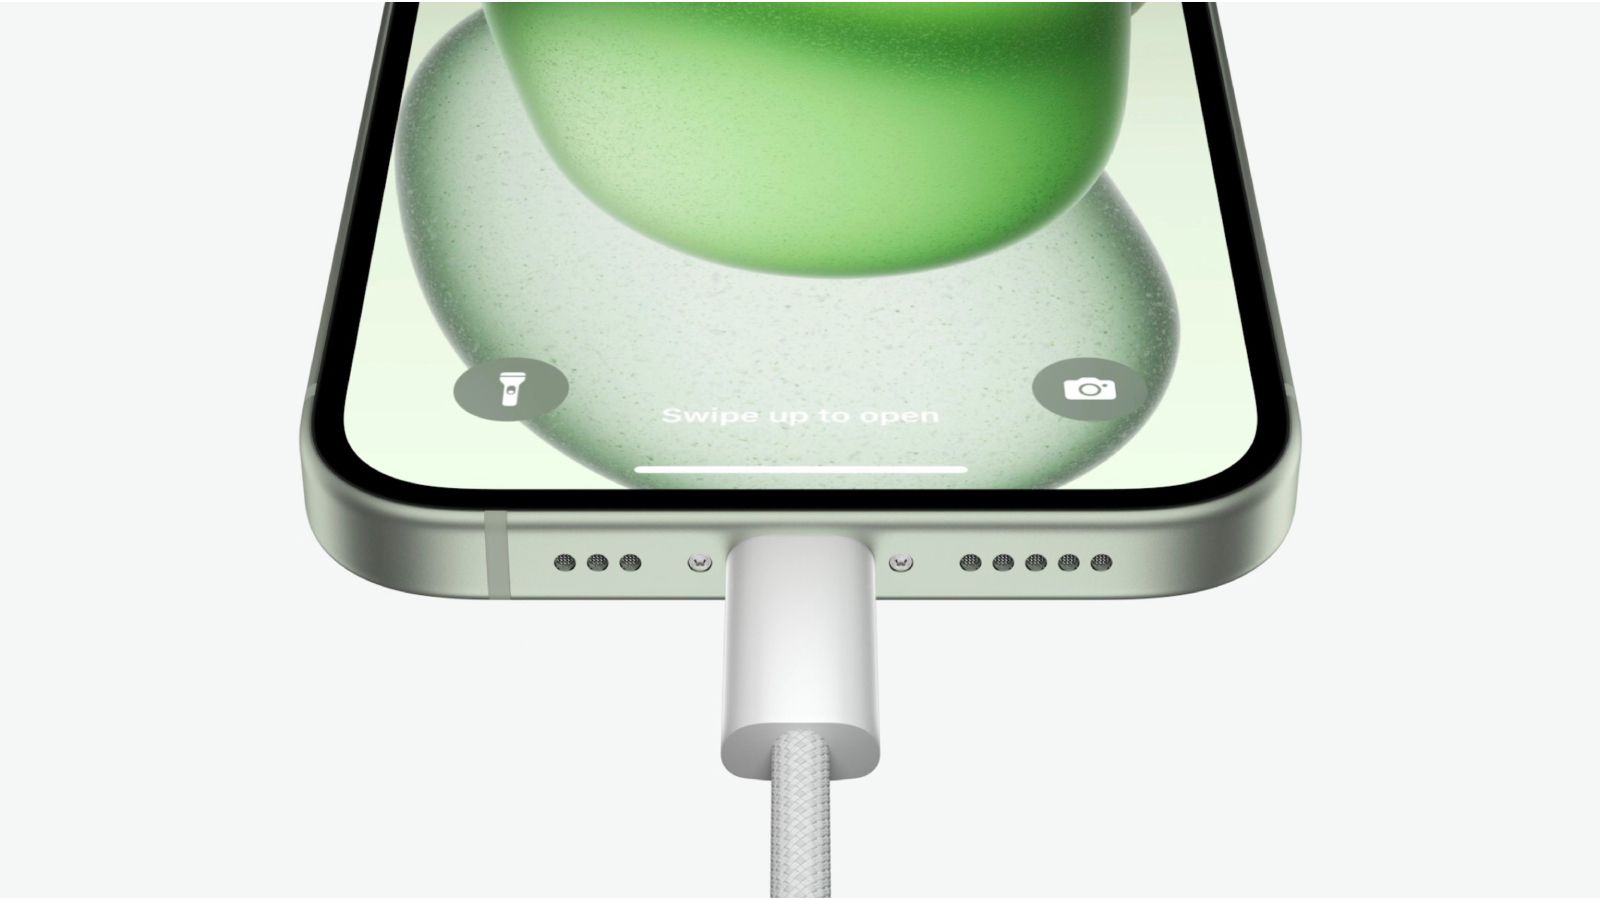 iPhone 15 USB-C port: 4.5W charging for accessories, USB 3.2 Gen 2 for Pro models and more